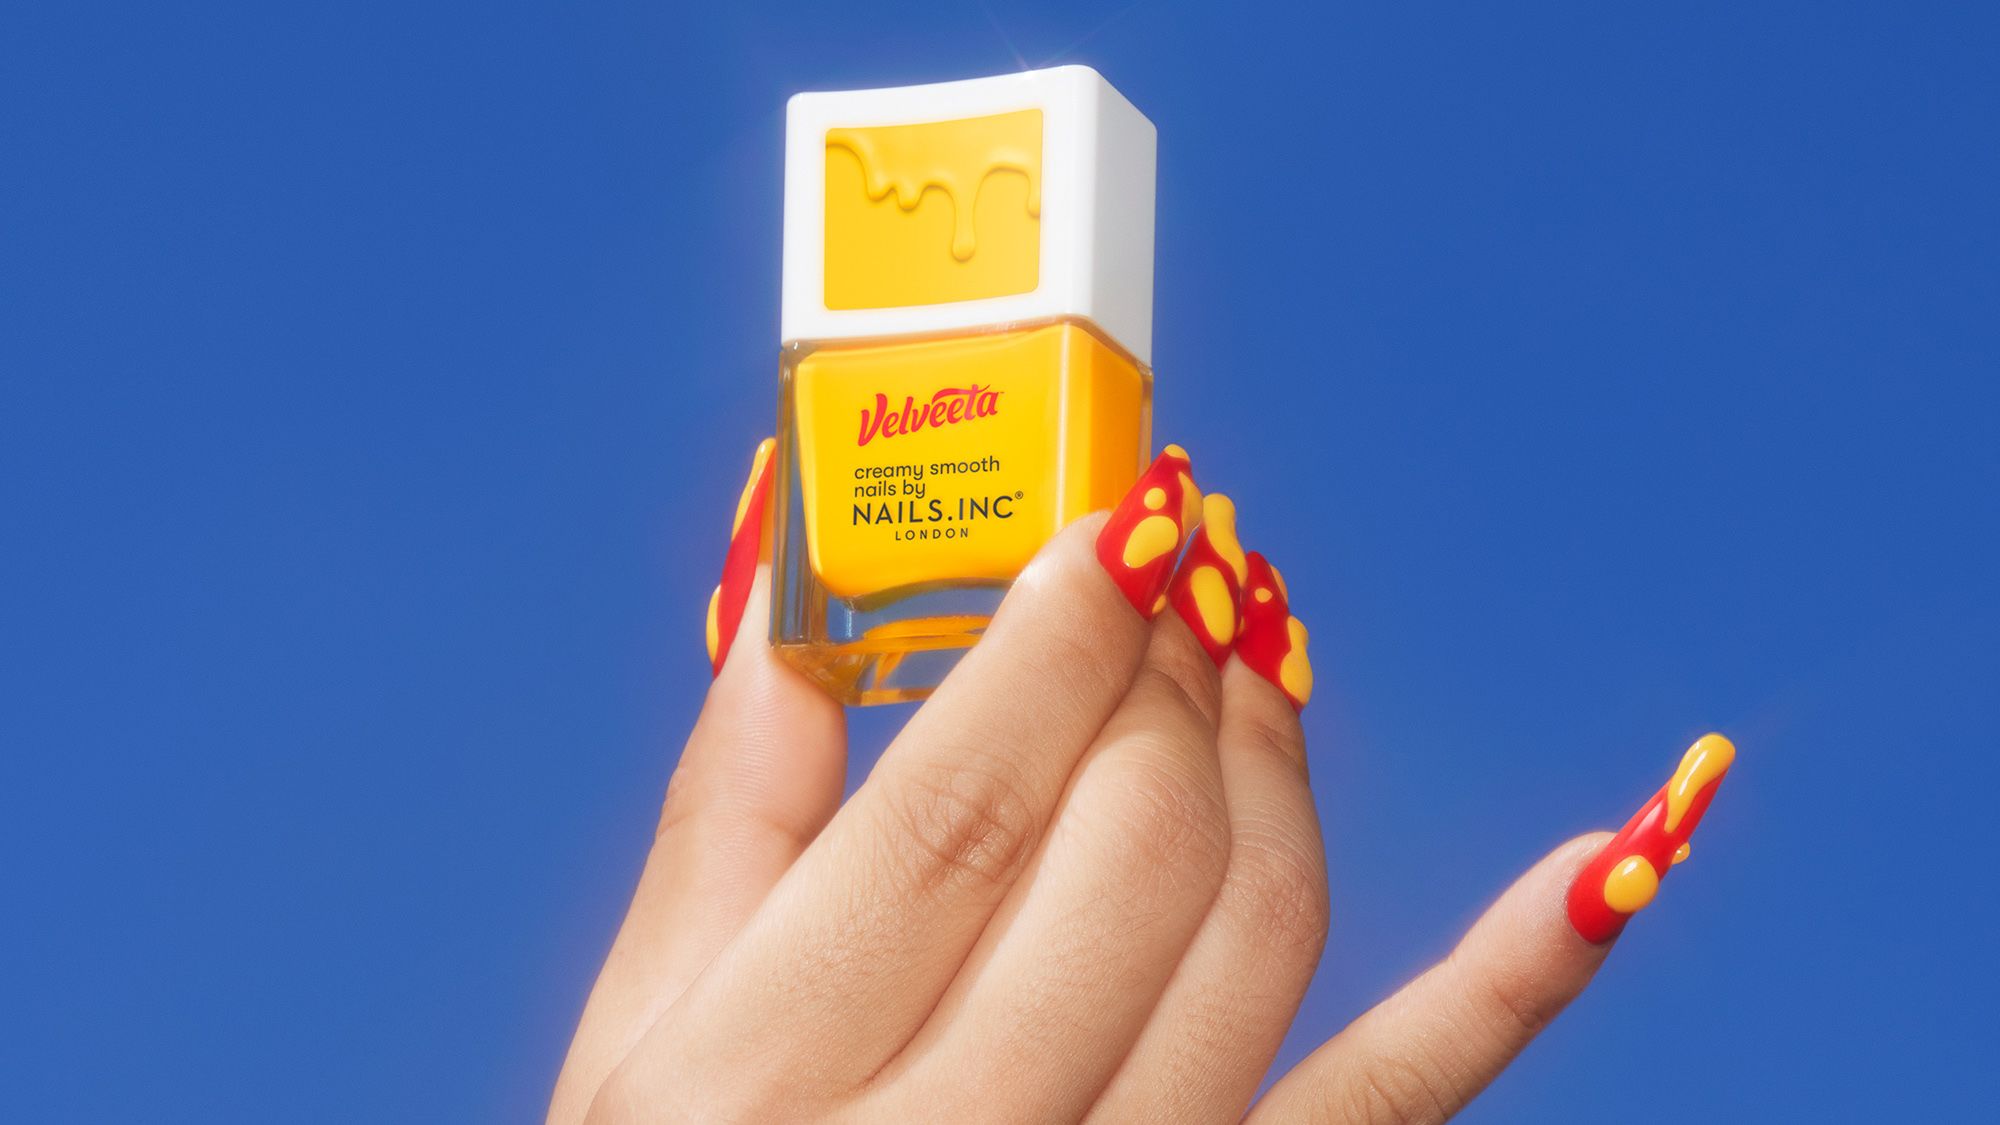 Velveeta releases a cheese-scented nail polish in collaboration with Nails  Inc. | CNN Business